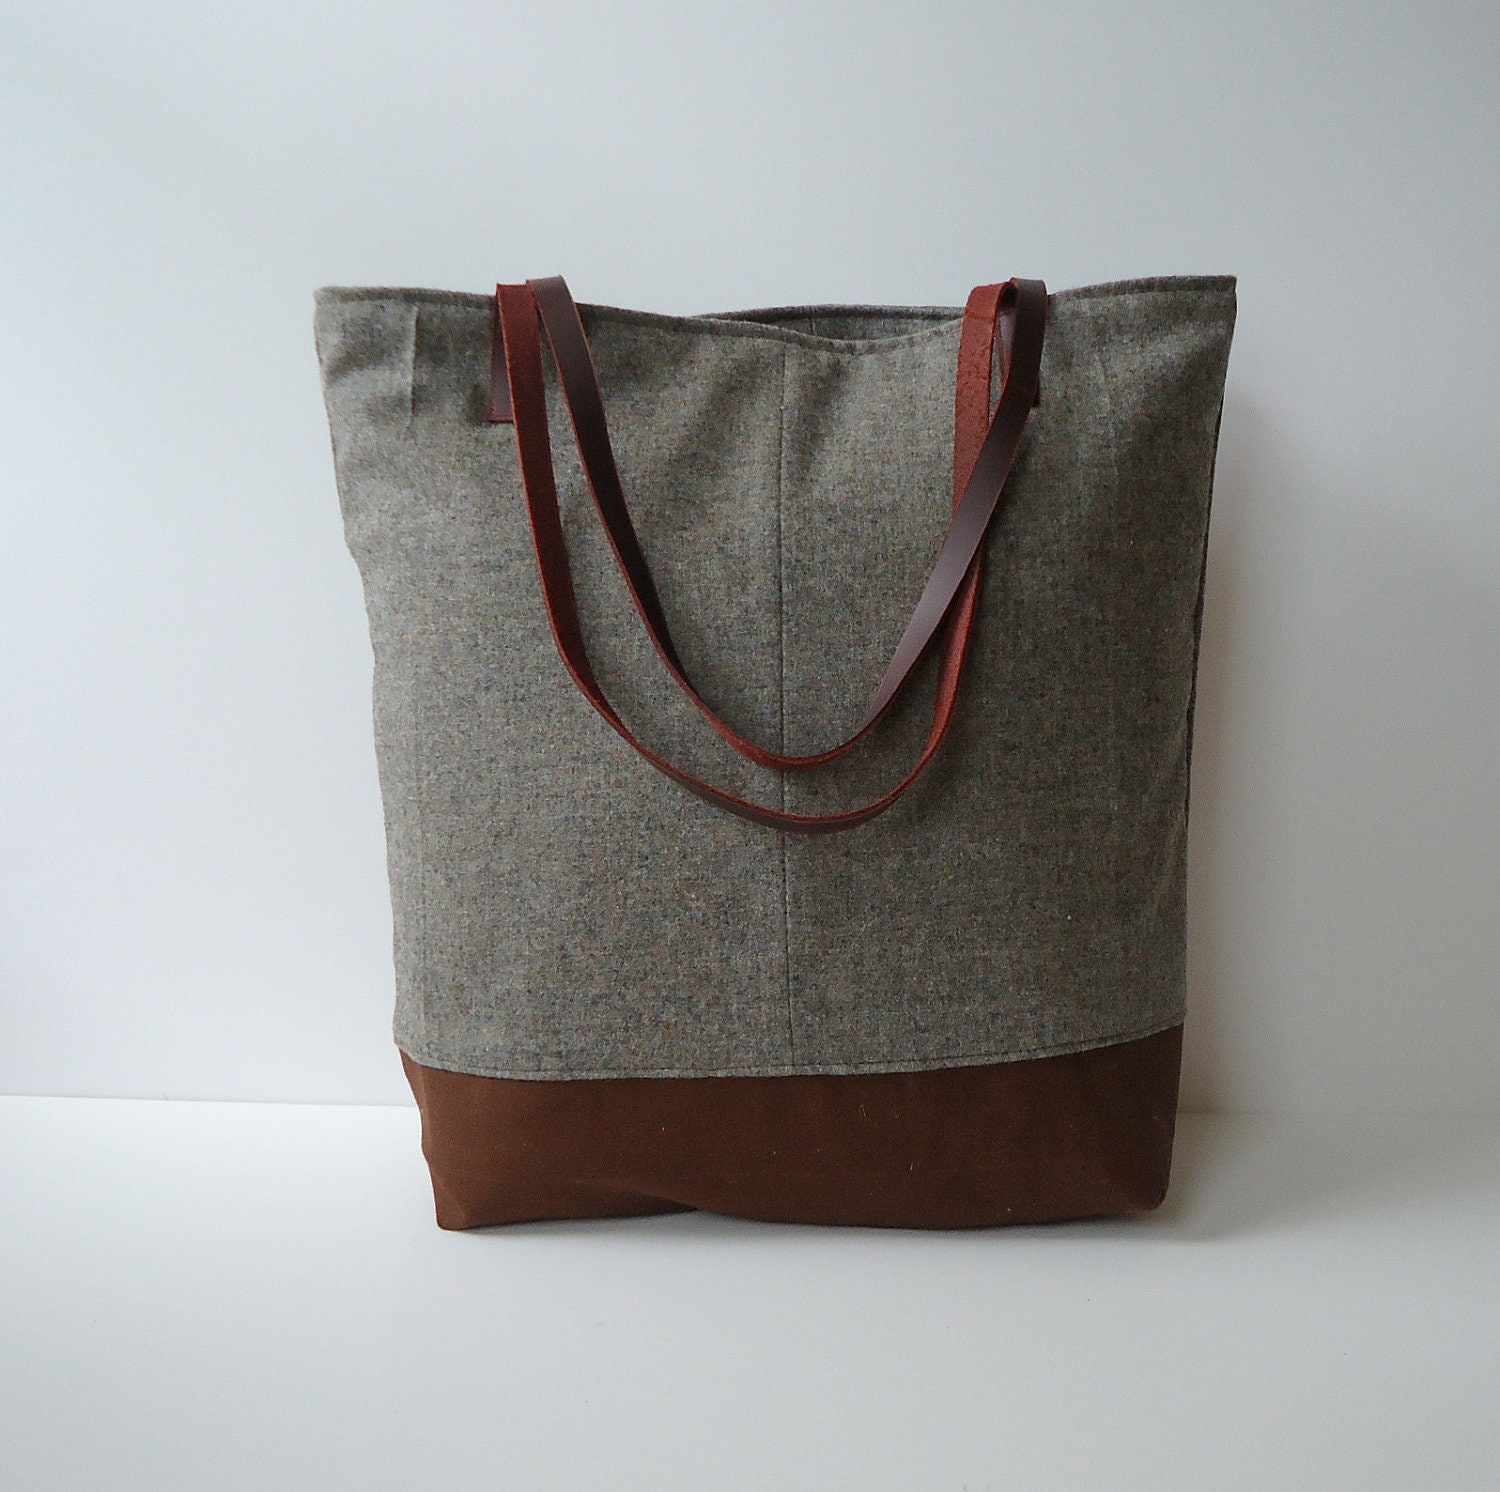 Upcycled Wool Pendleton Tote in Taupe Gray with Brown Leather